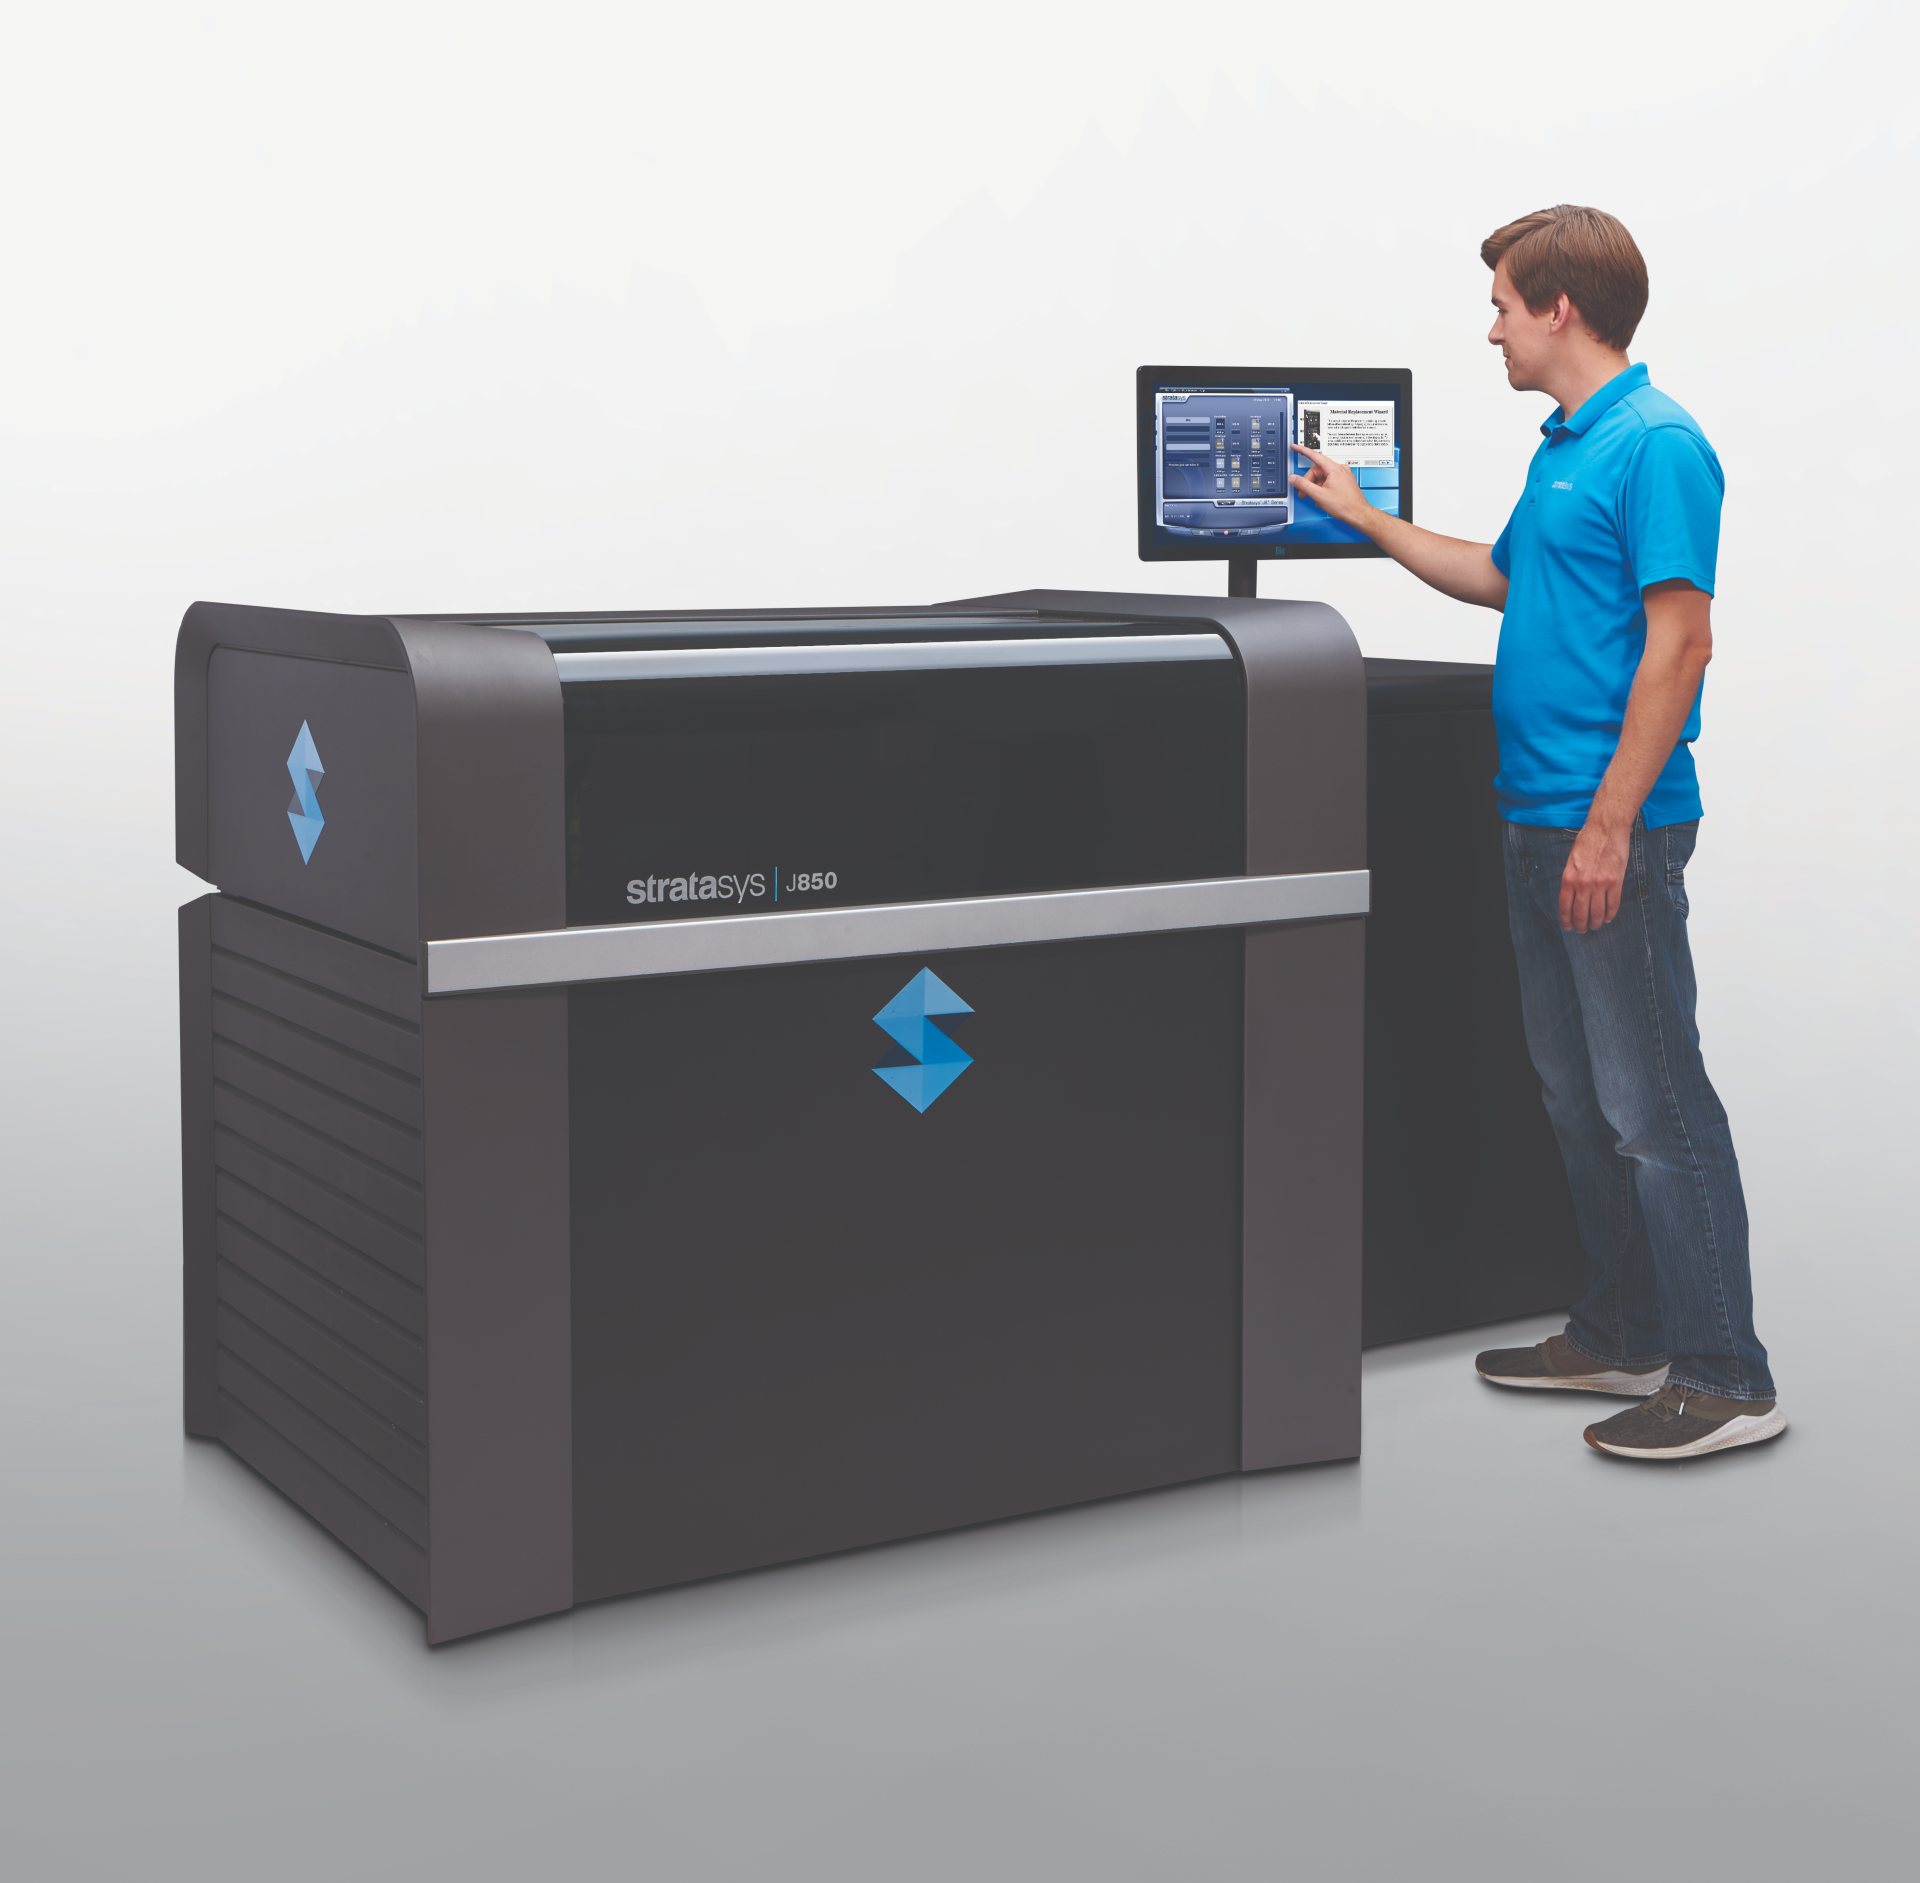 Stratasys launches the PolyJet J850 printer - technical specifications and - 3D Industry